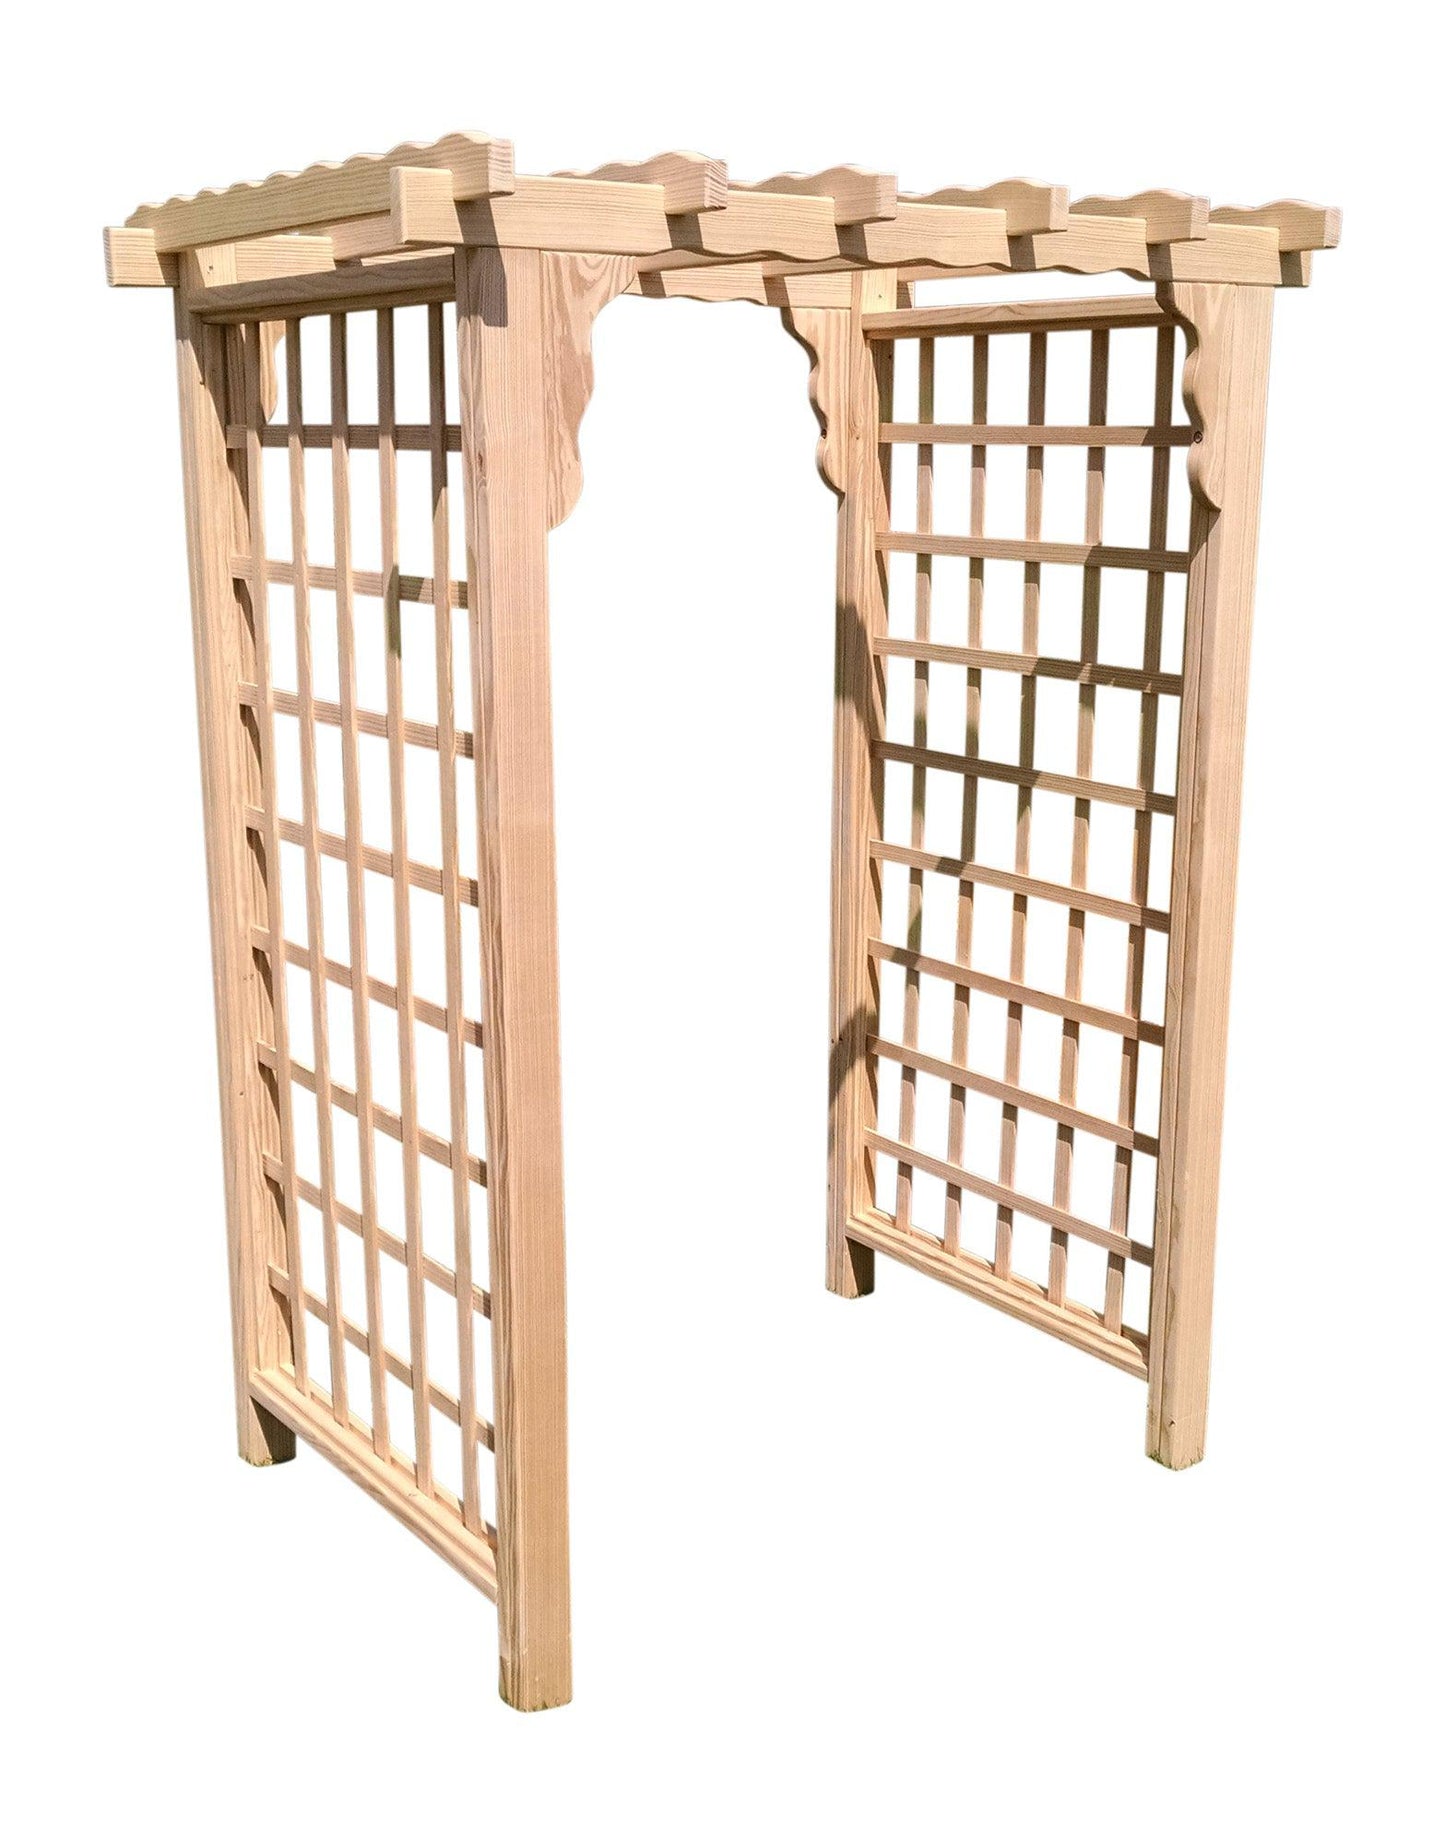 A&L FURNITURE CO. 5' Lexington Pressure Treated Pine Arbor - LEAD TIME TO SHIP 10 BUSINESS DAYS